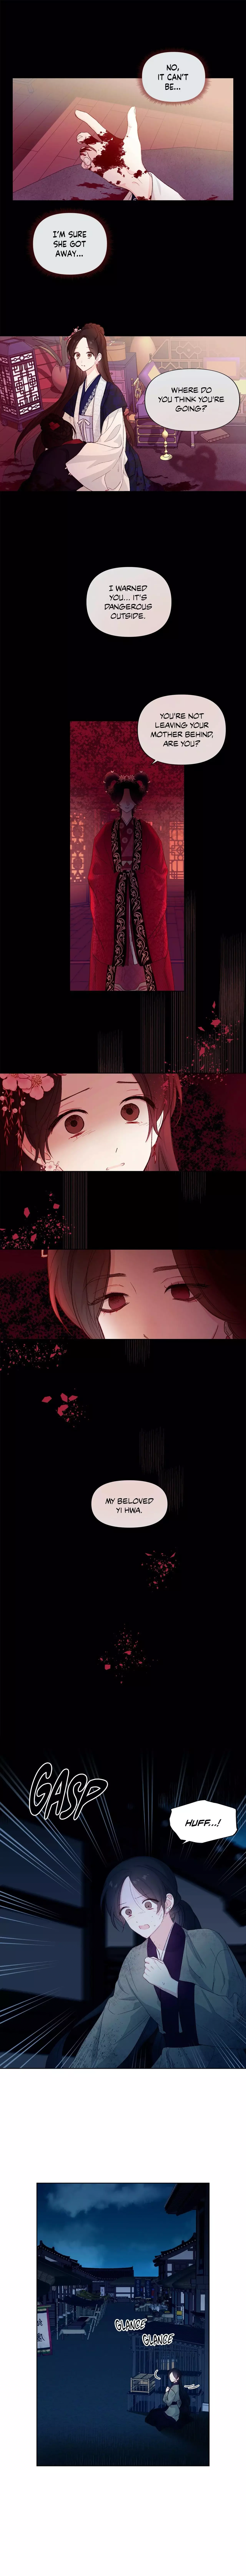 Under The Cherry Blossoms - 1 page 2